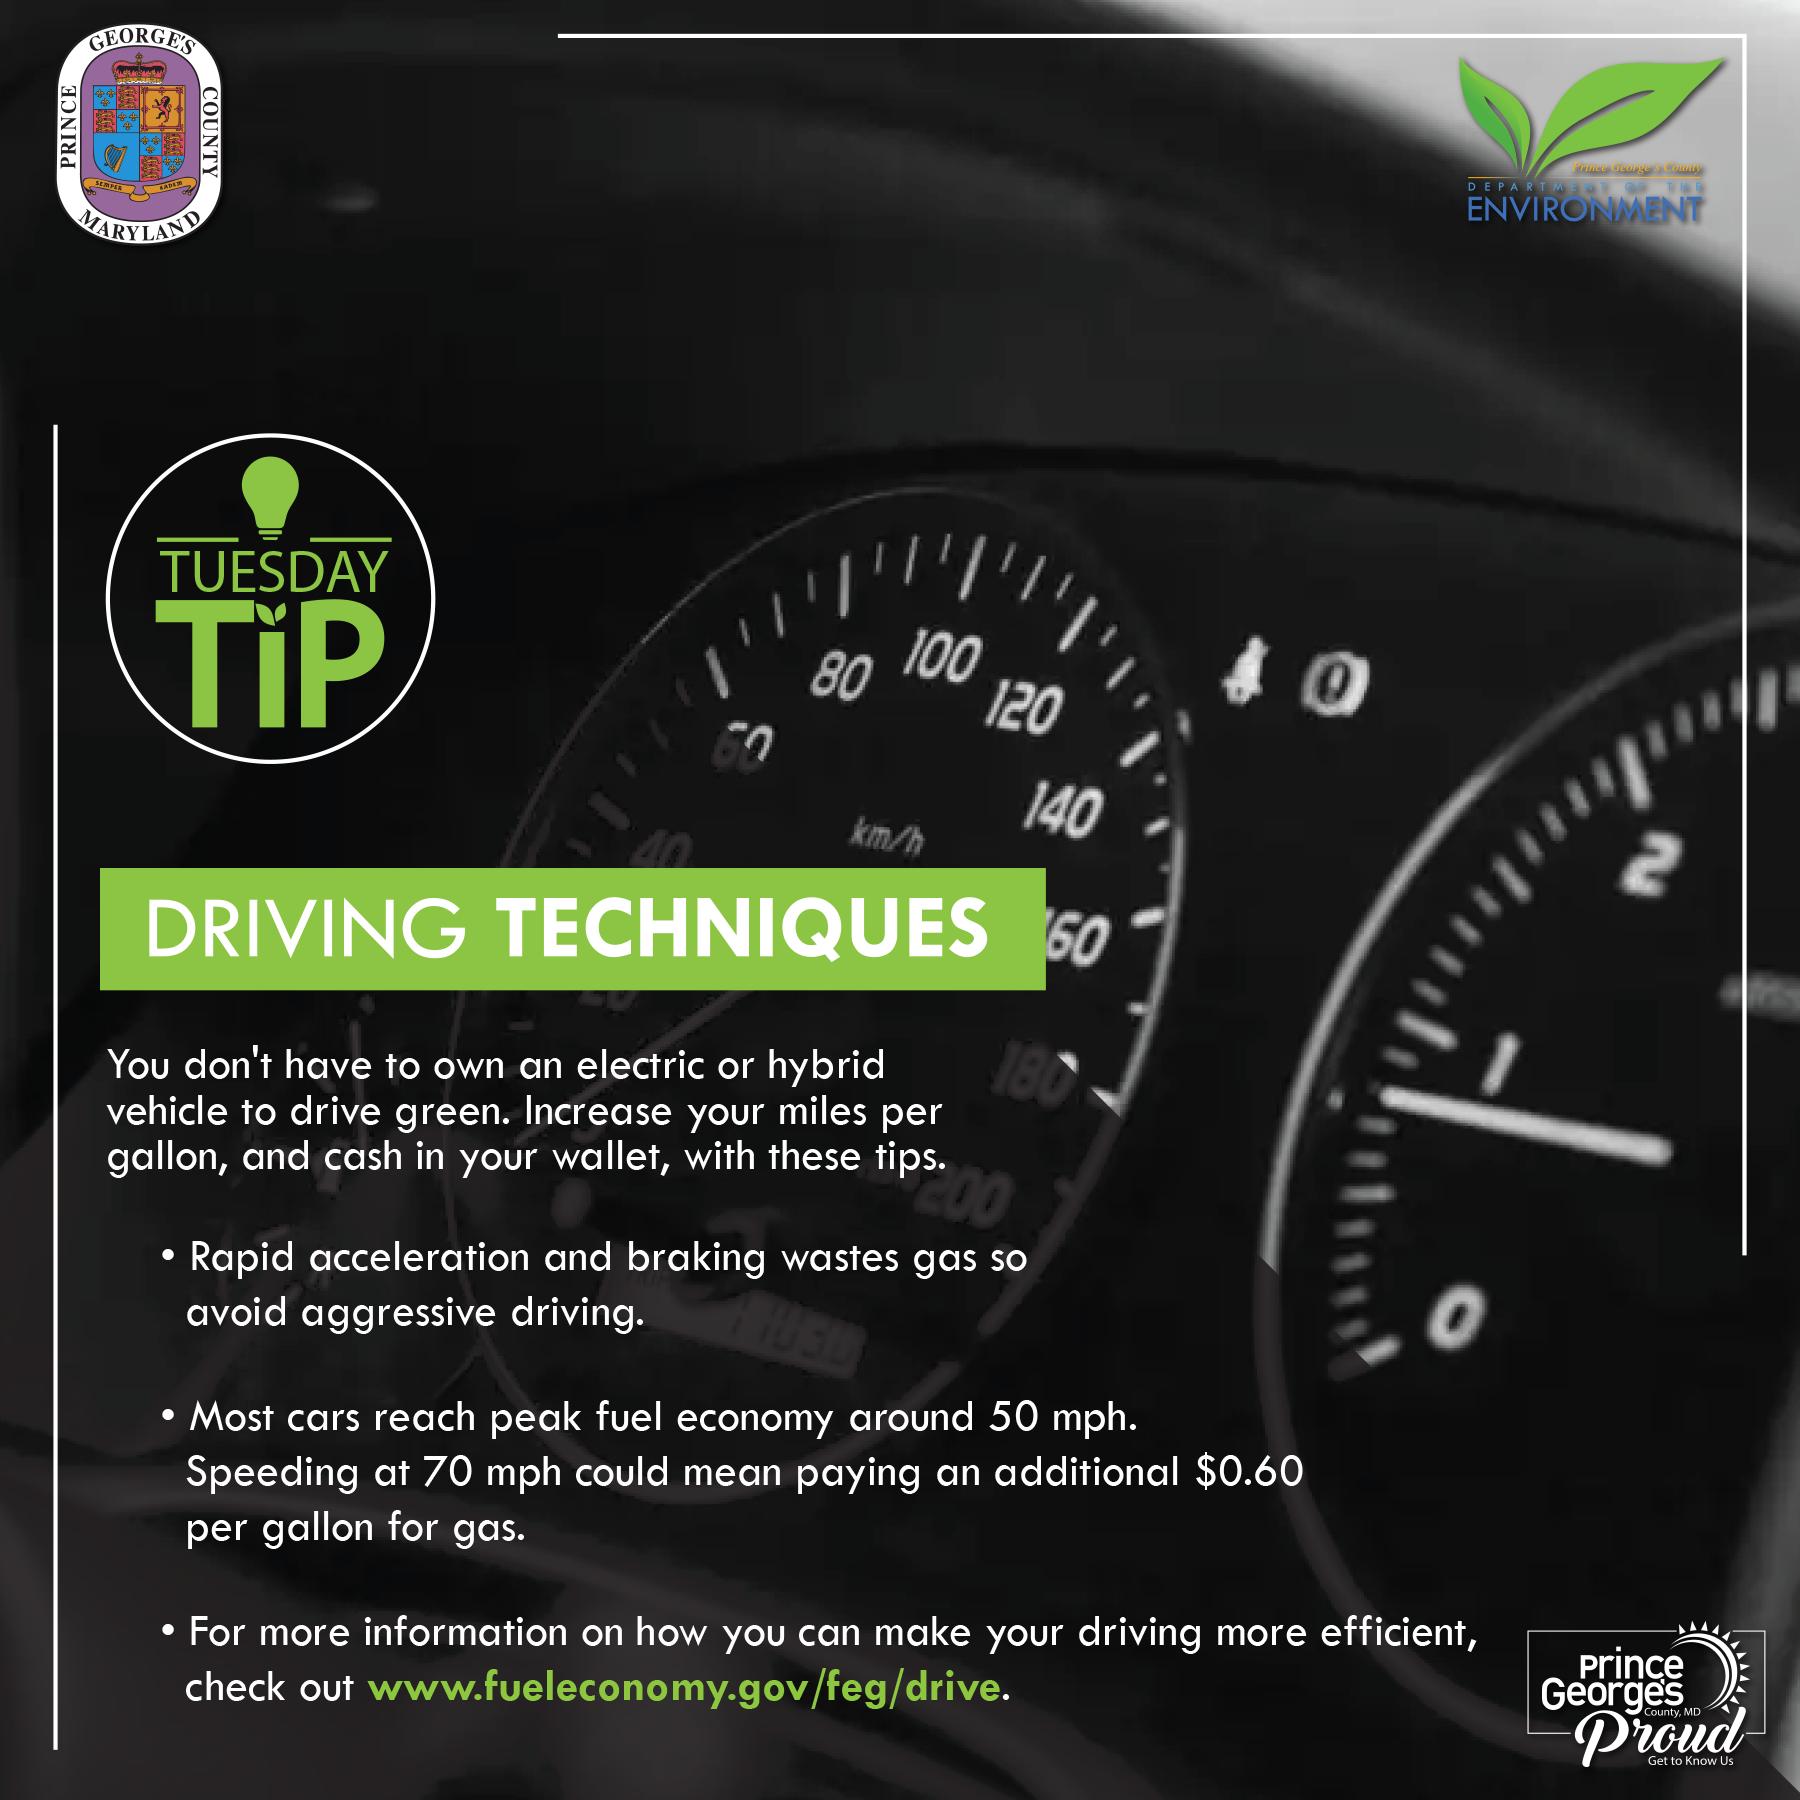 Tues tip 7.27.20 driving eng